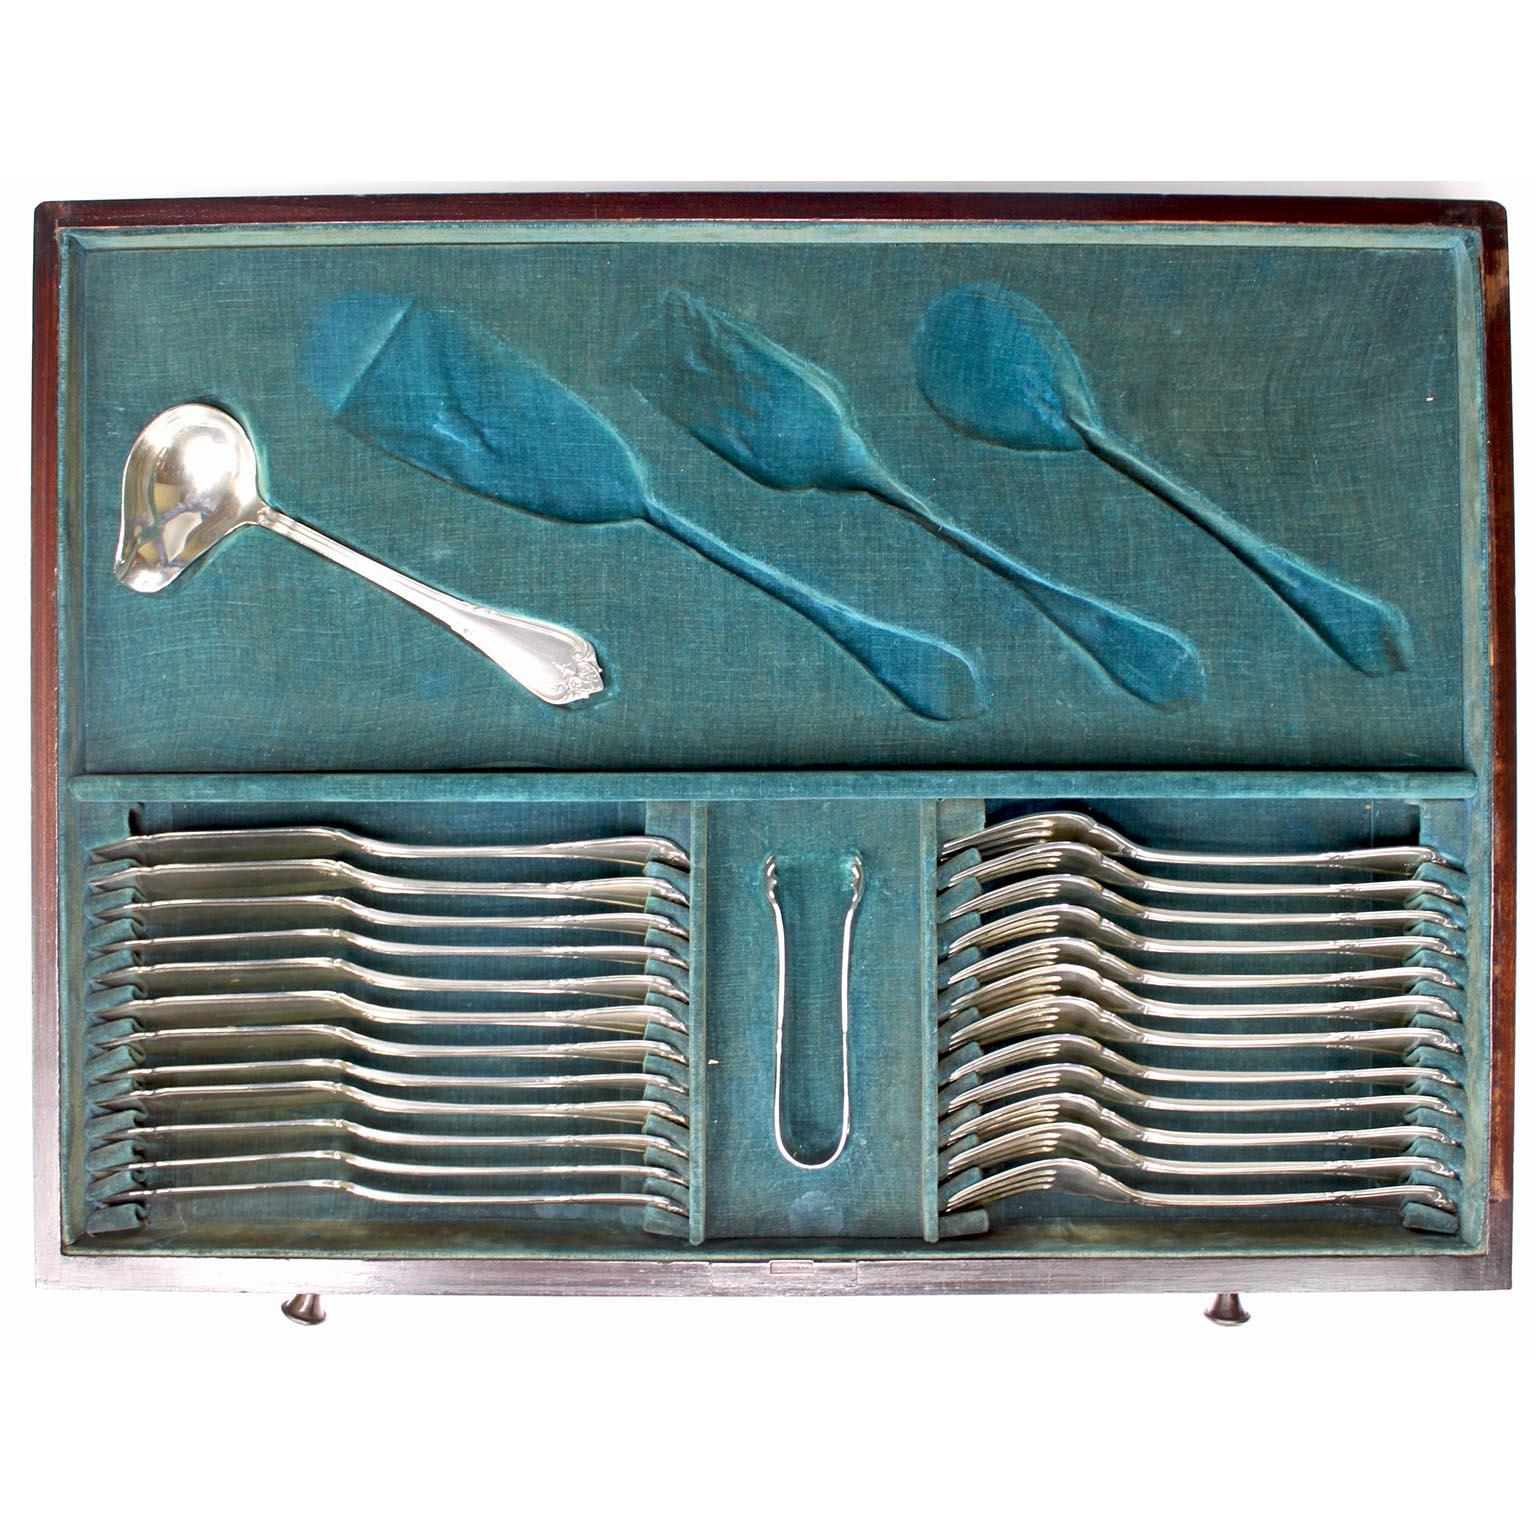 A Fine Early 20th Century 152 Piece Austrian Flatware Set by Berndorf Alpacca For Sale 3